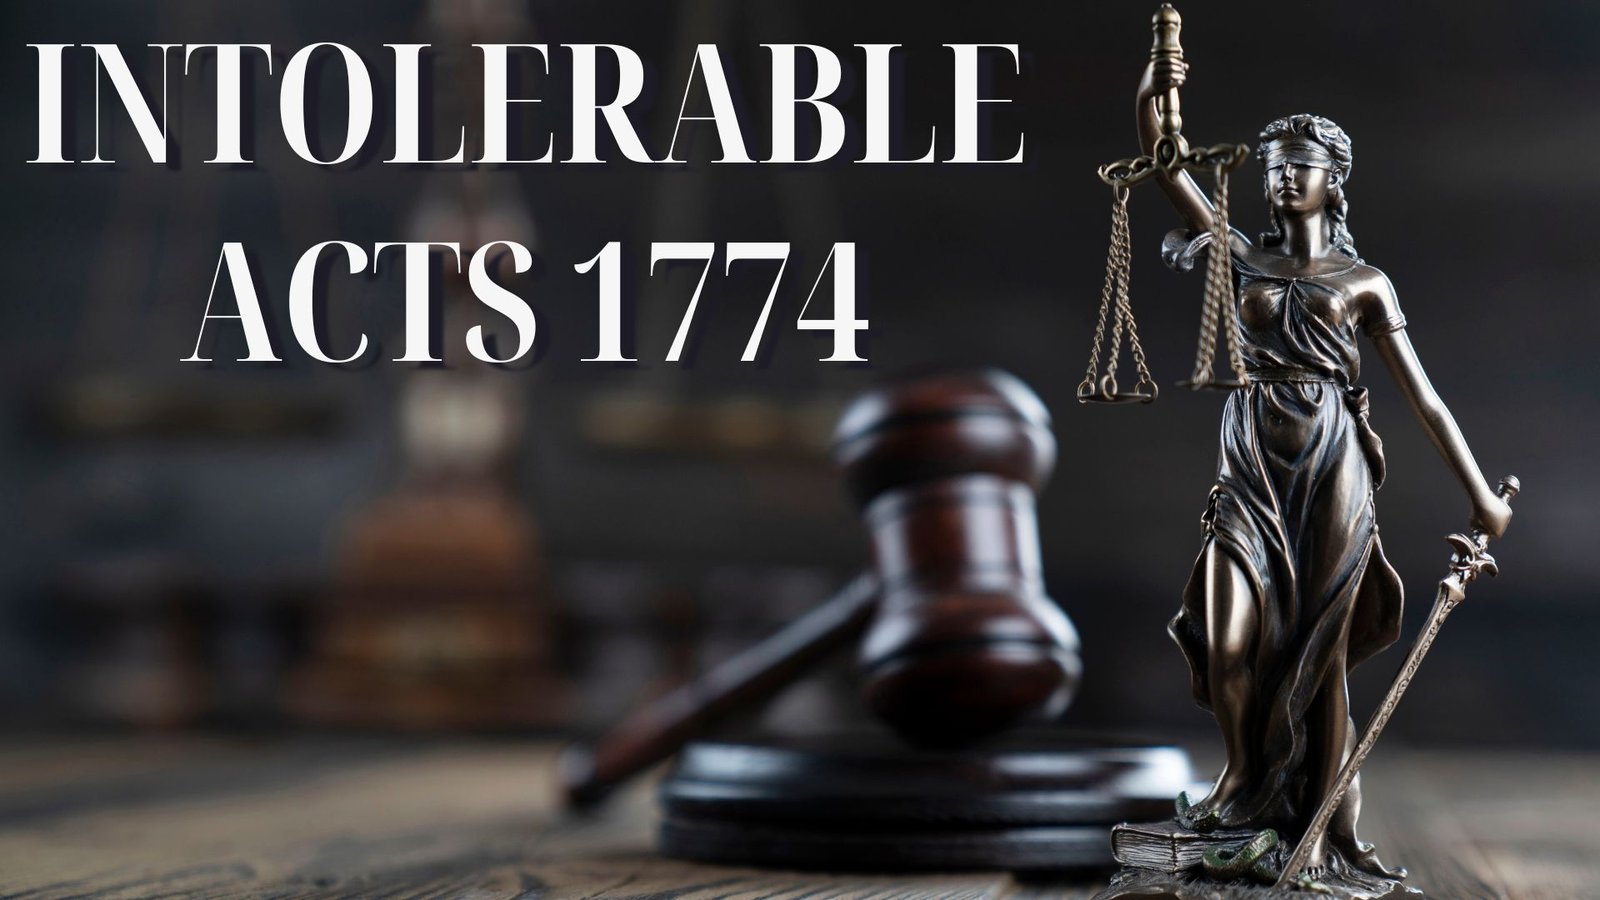 intolerable acts 1774, Lawforeverything